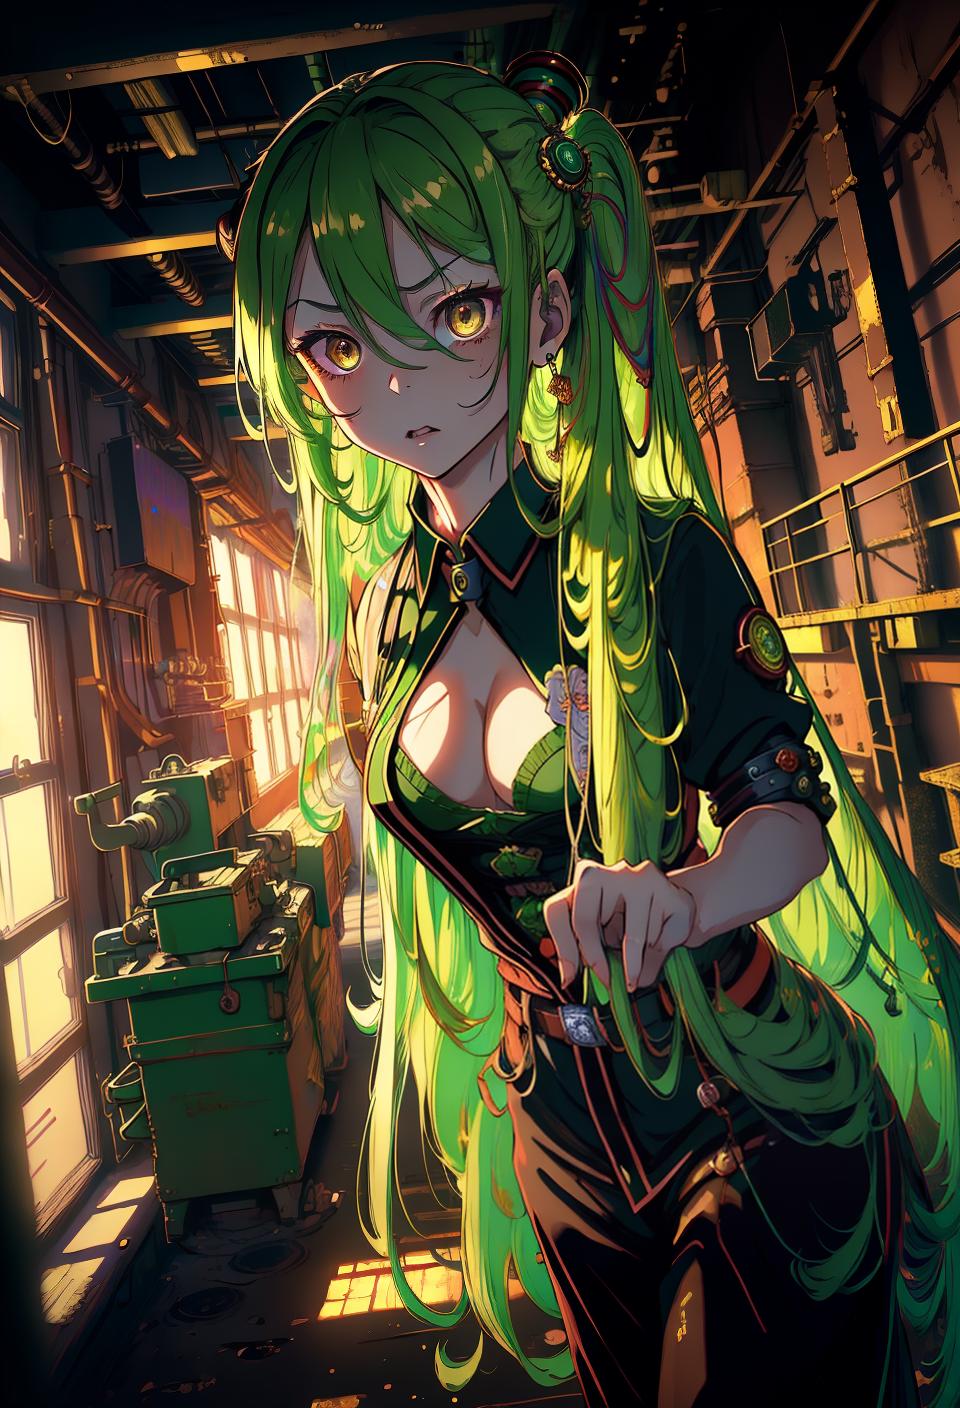  ((trending, highres, masterpiece, cinematic shot)), 1girl, chibi, female aristocrat, rusty factory scene, very long curly green hair, shaved head, large rainbow-colored eyes, evil personality, worried expression, fair skin, magical, energetic